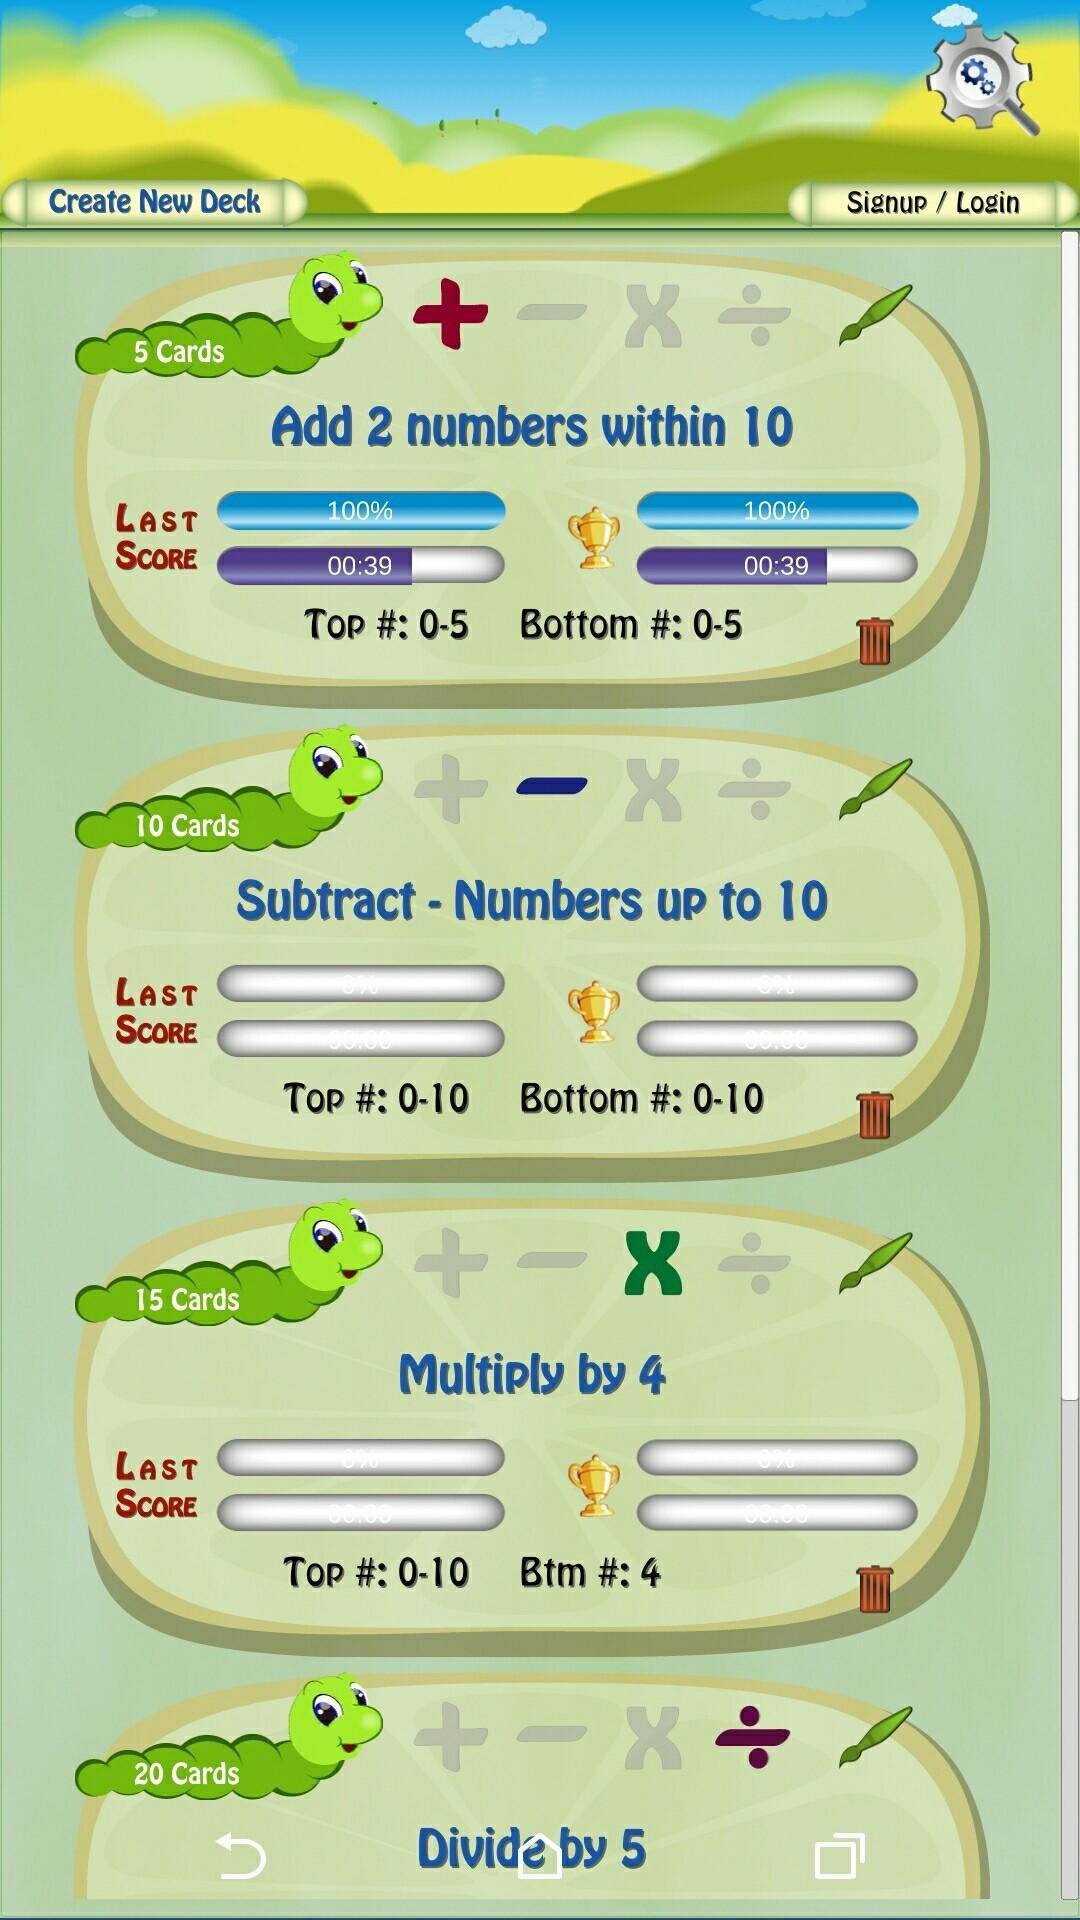 A+ Math Flash Cards App Free - Practice Math Facts For